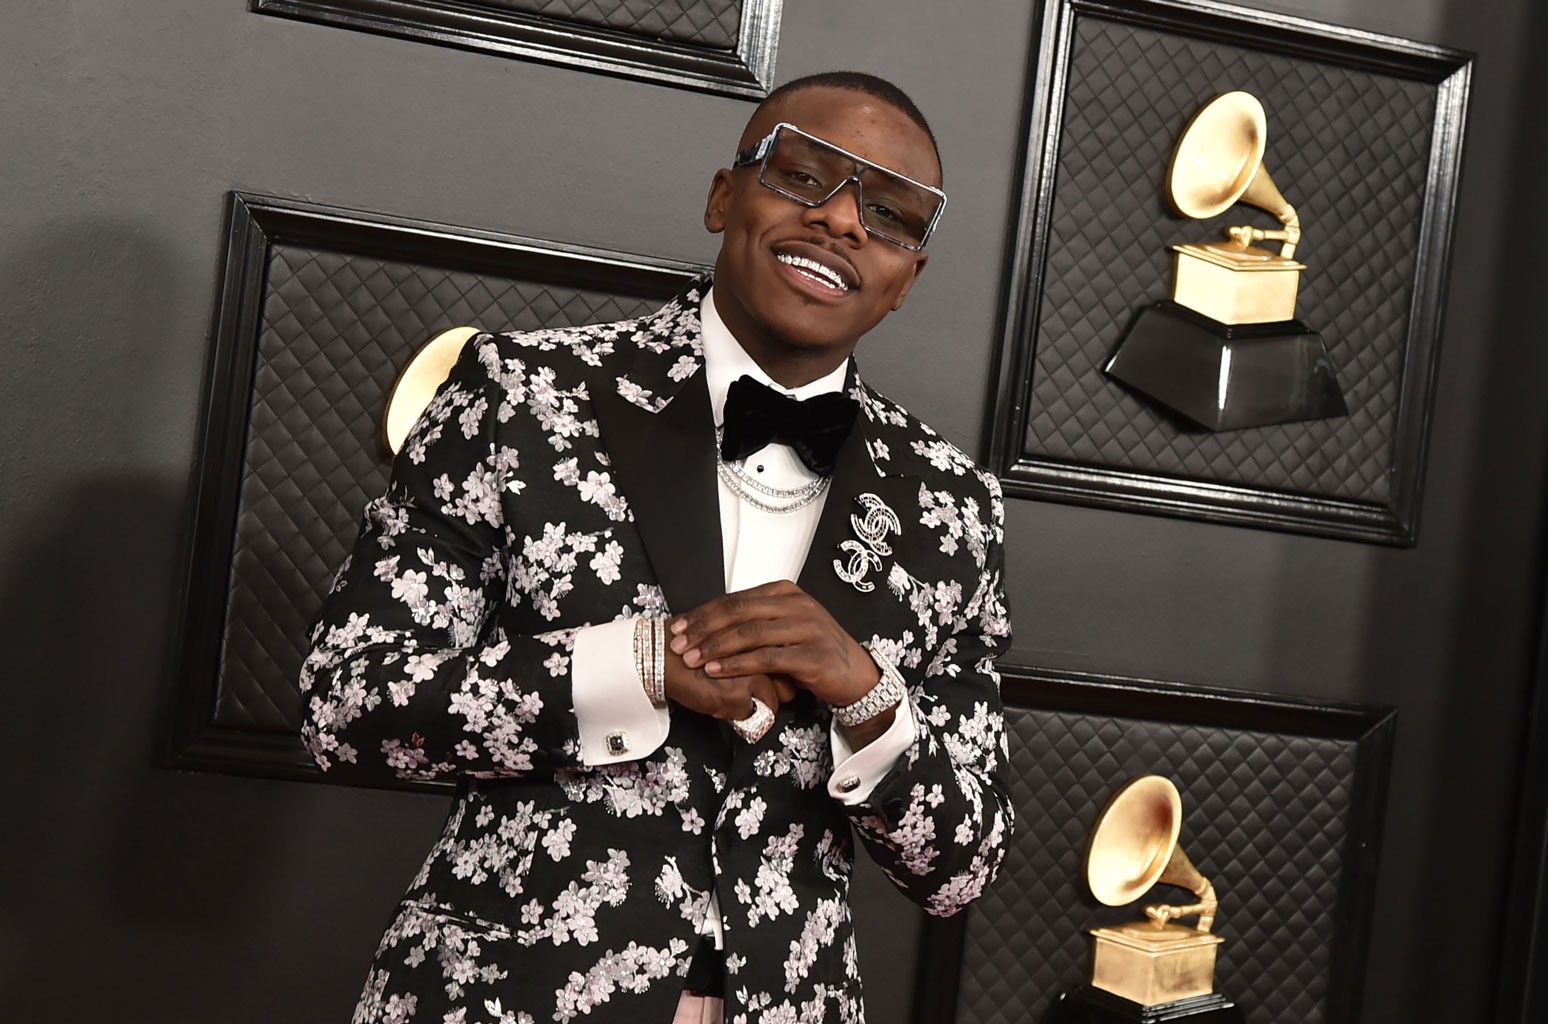 This Is How Knockout Fashion Statement Is Made By DaBaby At Grammys 2021